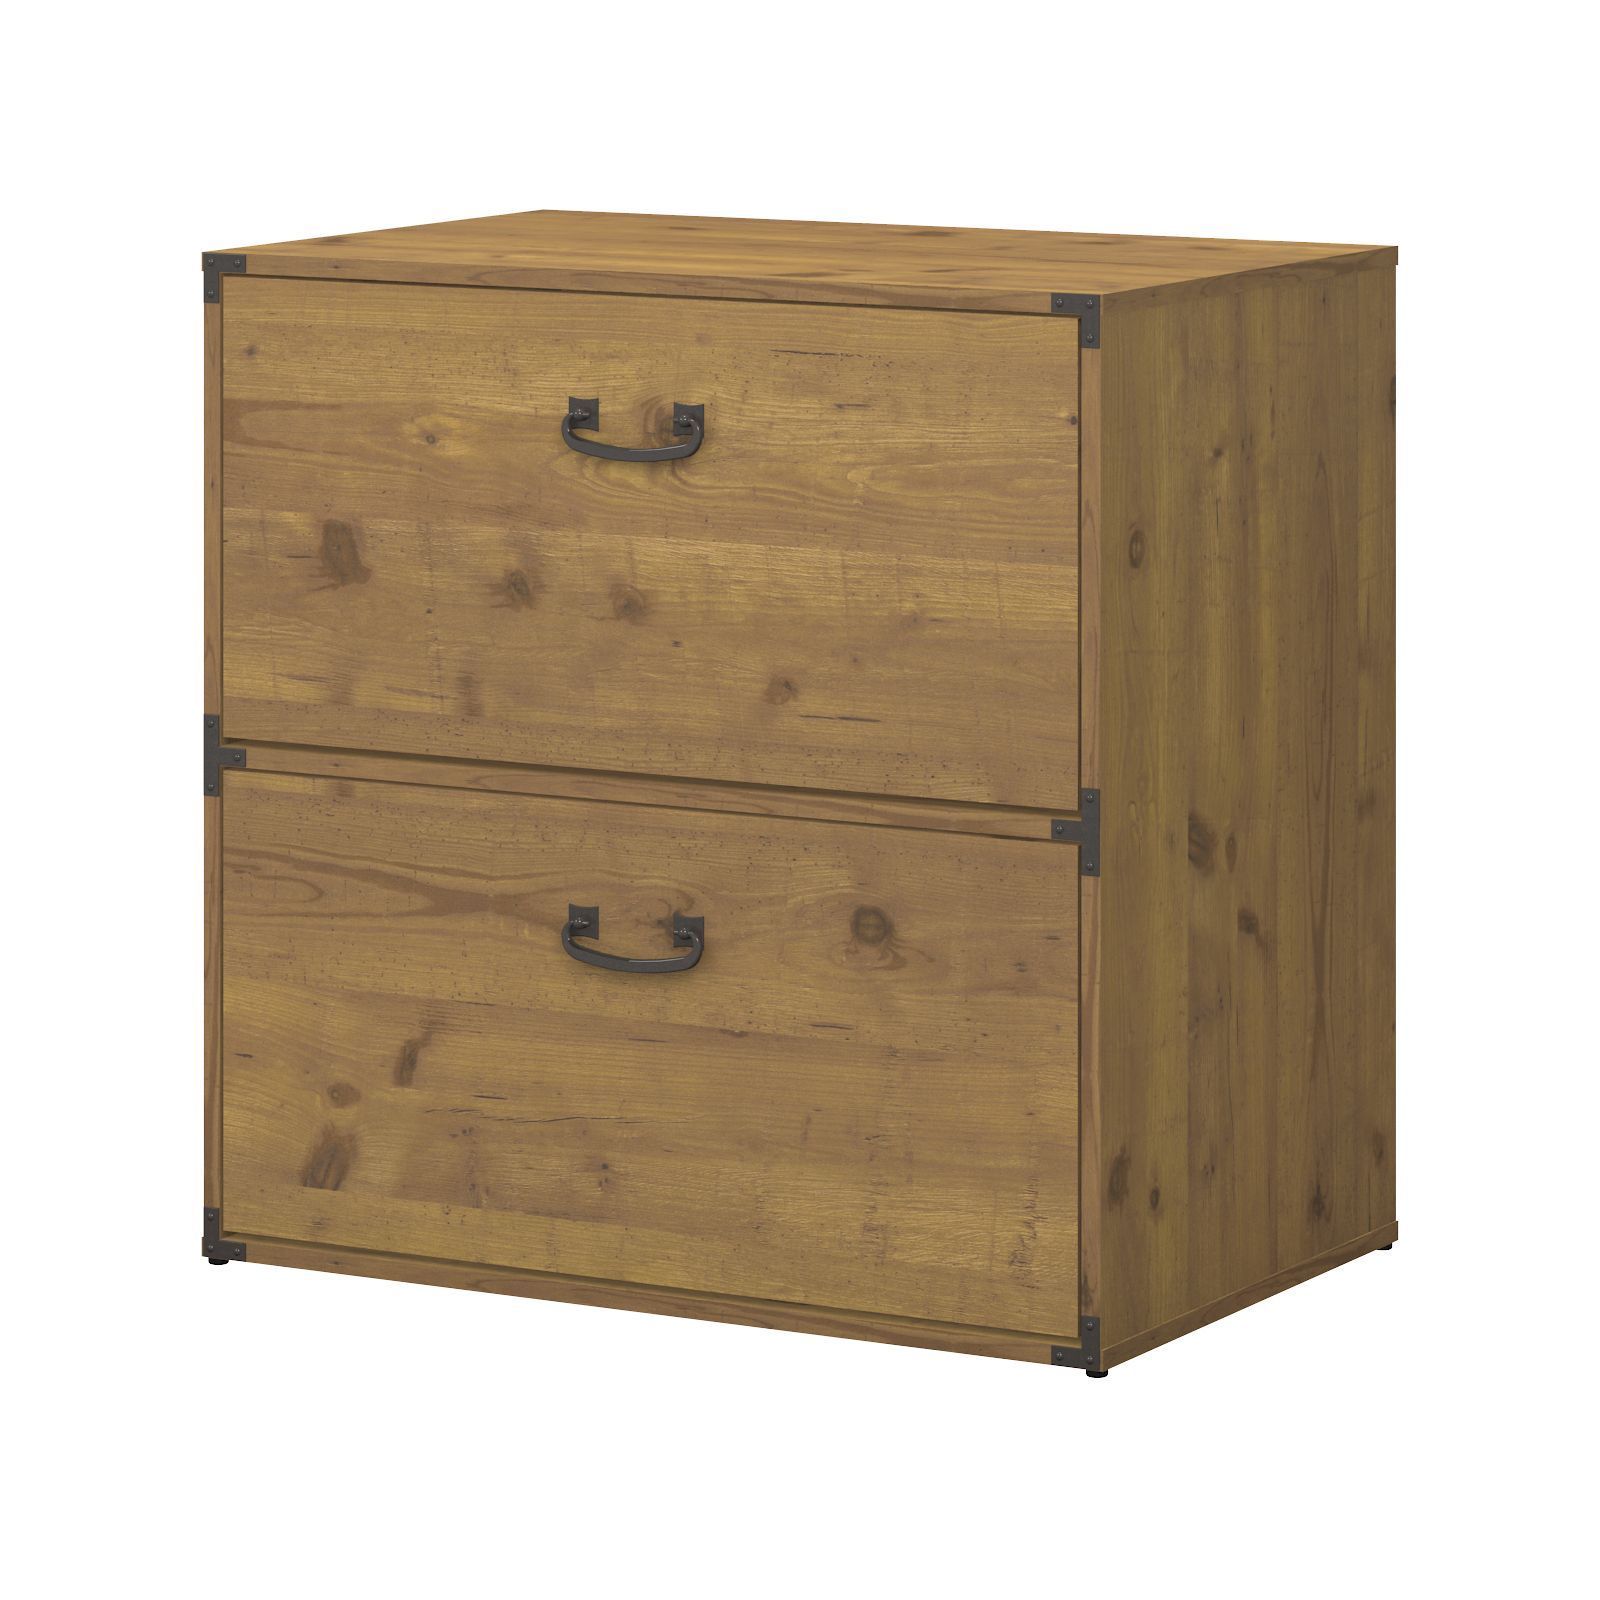 kathy ireland Office Ironworks 2 Drawer Mobile File Cabinet in Pine 